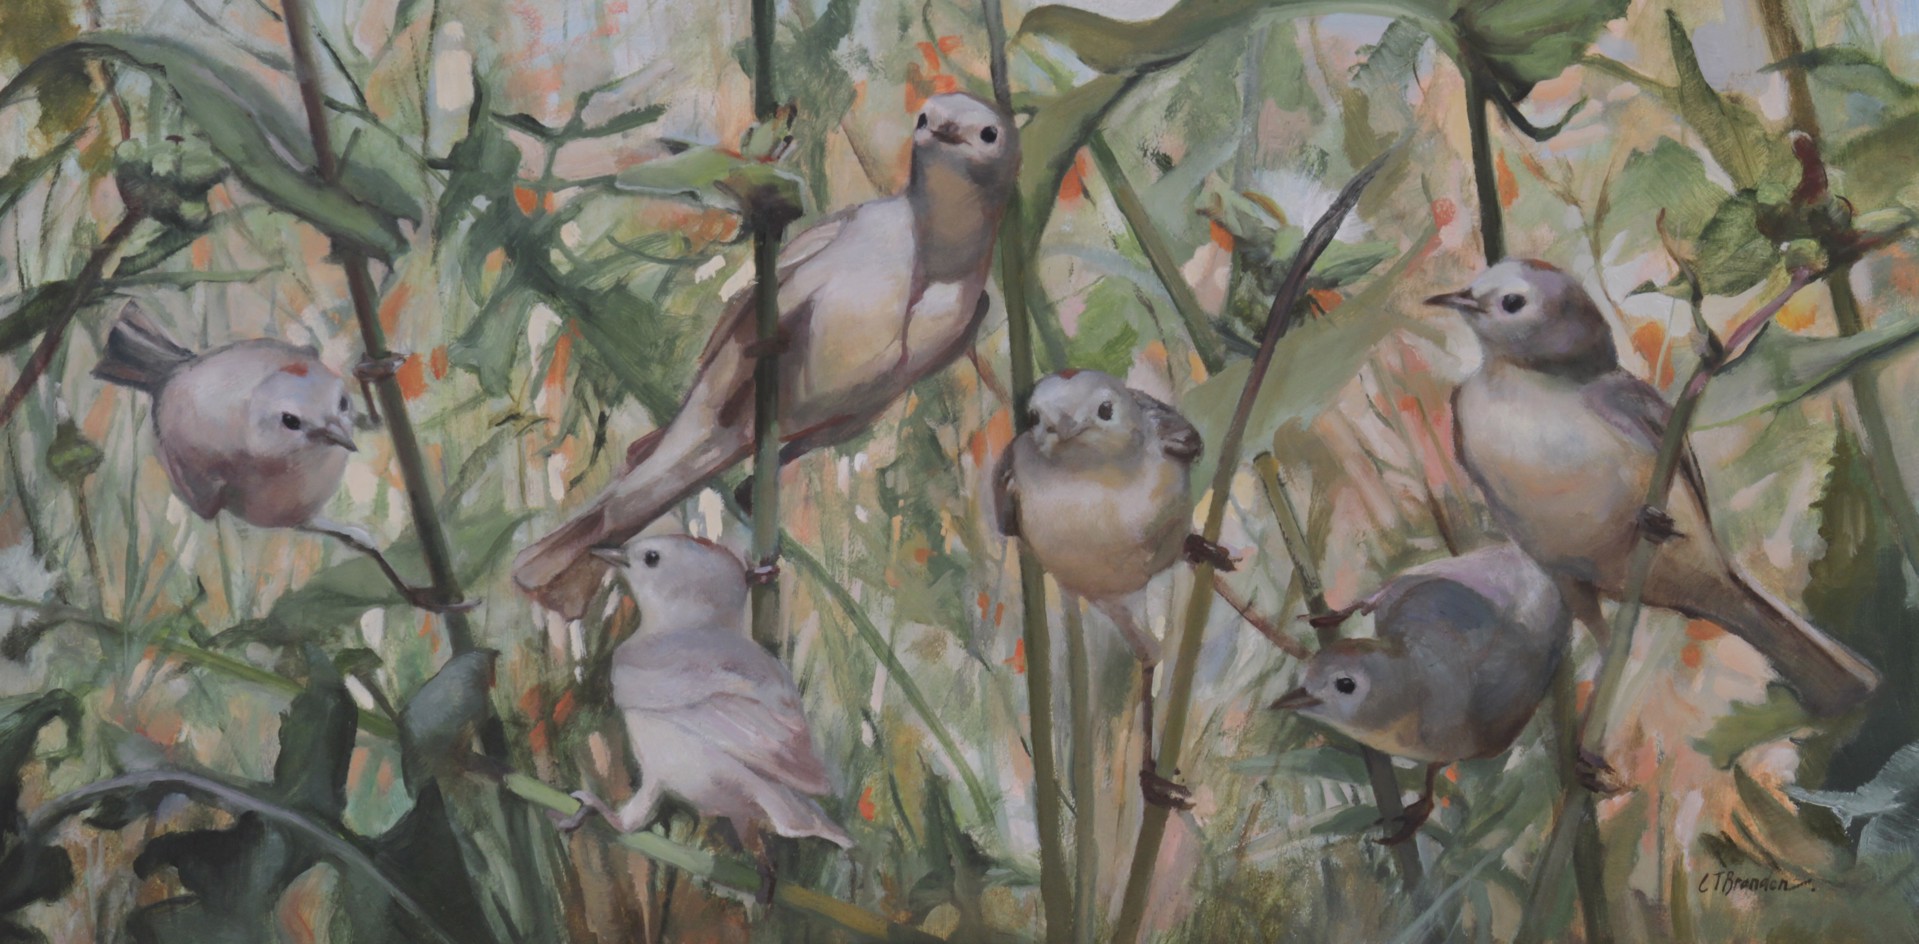 Lucy's Warblers in the Weeds by Linda Tracey Brandon